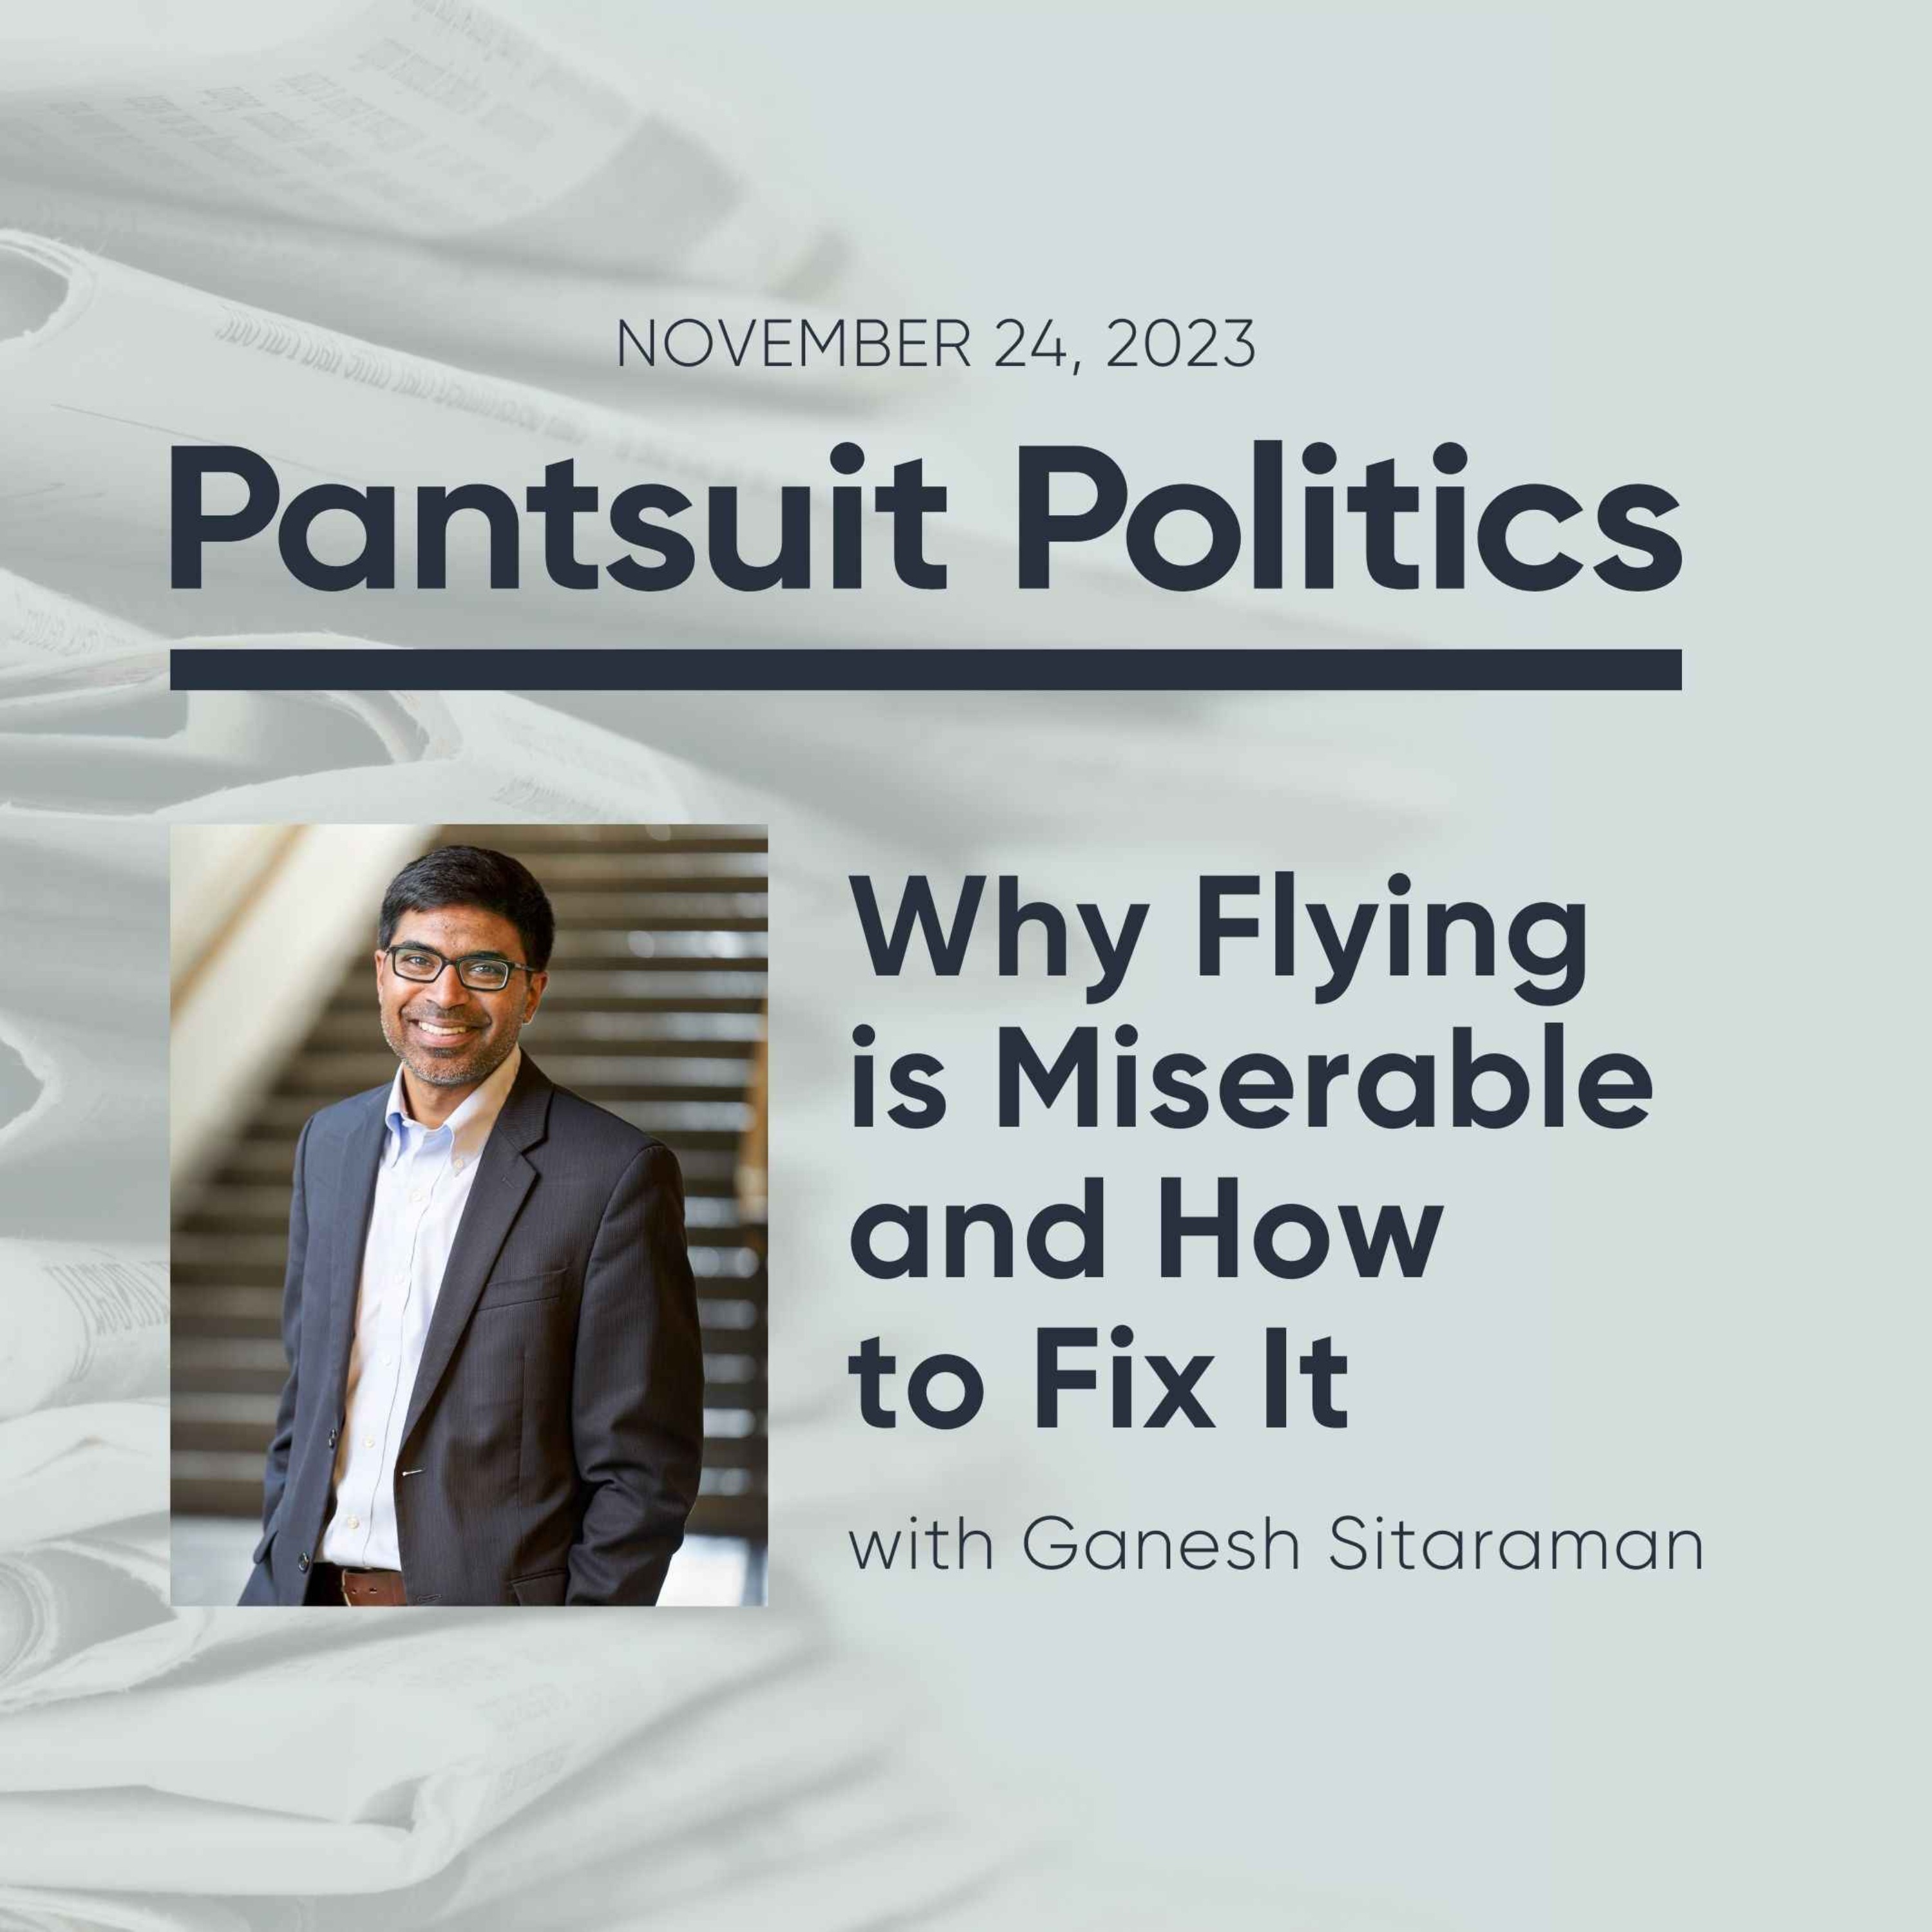 Why Flying is Miserable with Ganesh Sitaraman